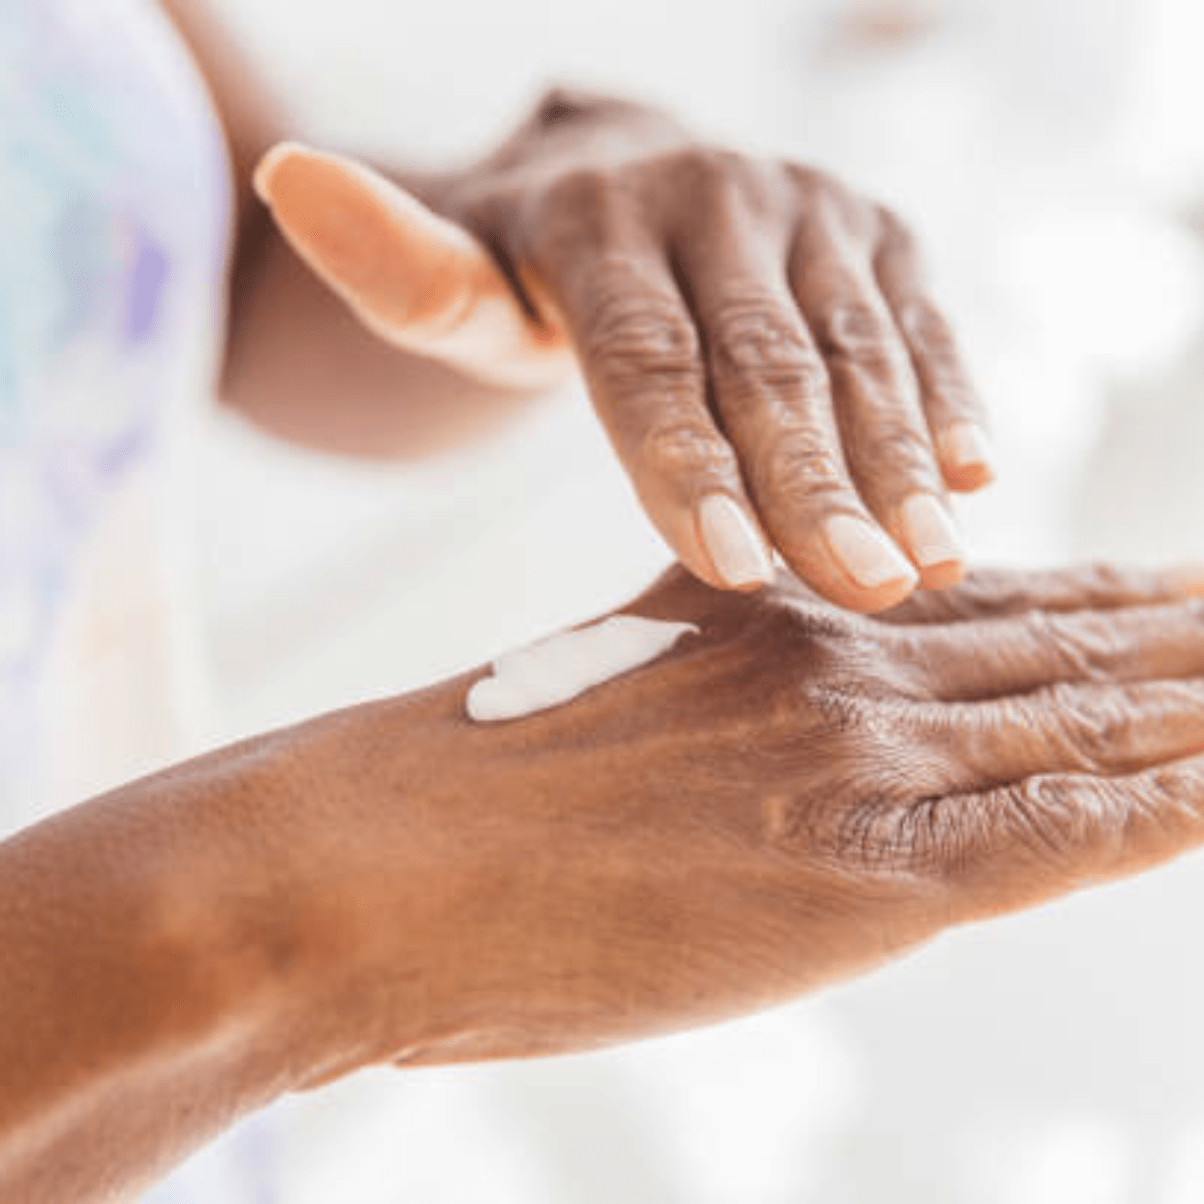 a photo of an aged hands with a topical cream for body rejuvenation